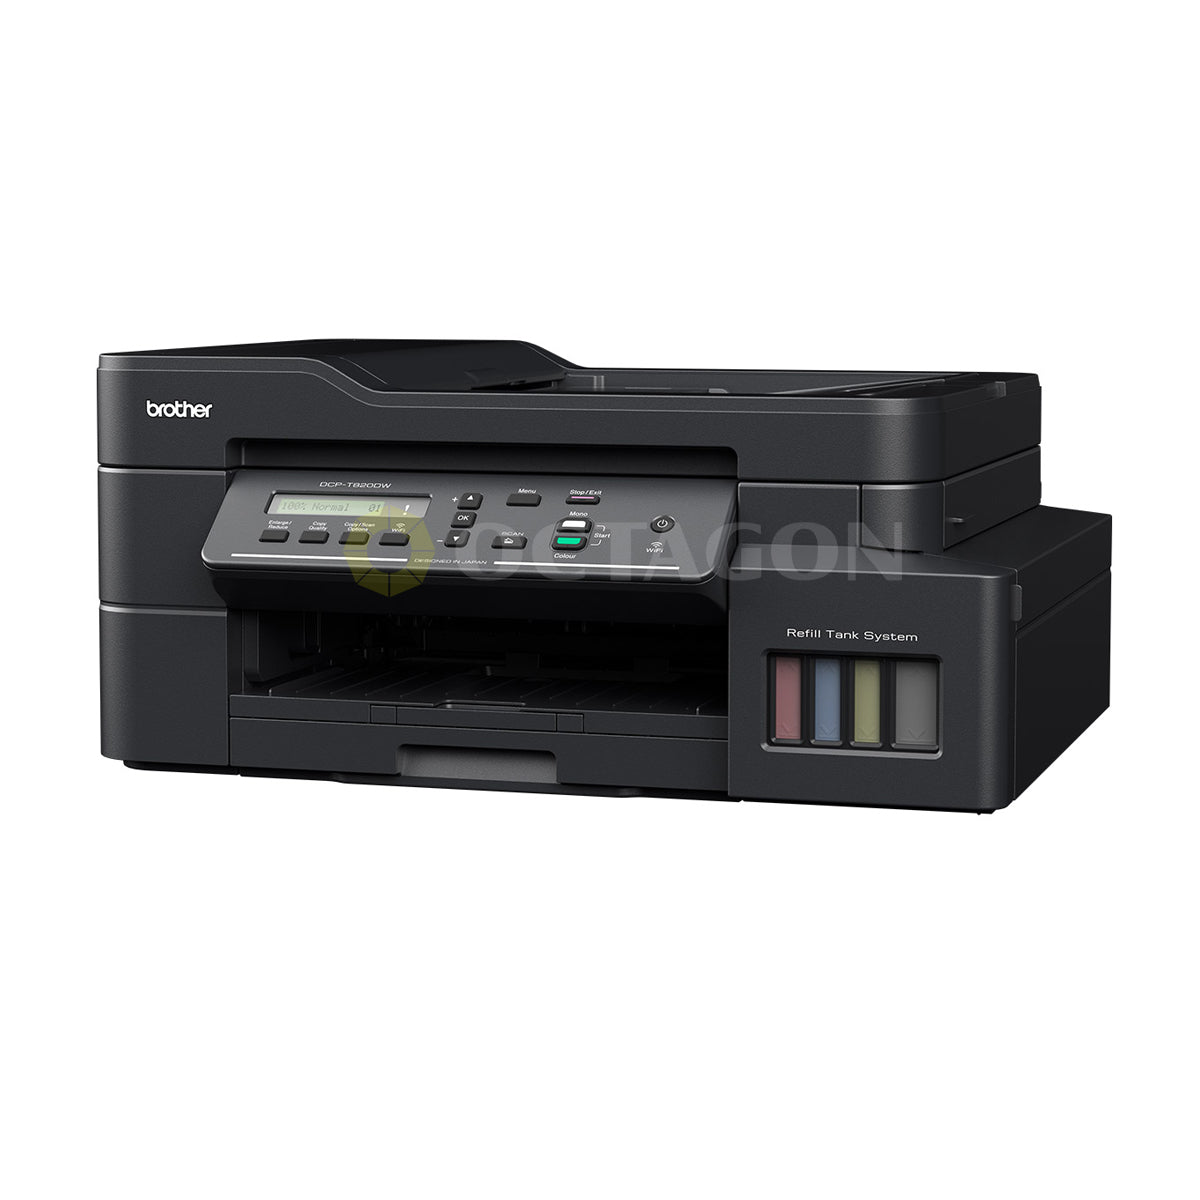 BROTHER DCP-T820DW RTS PRINTER